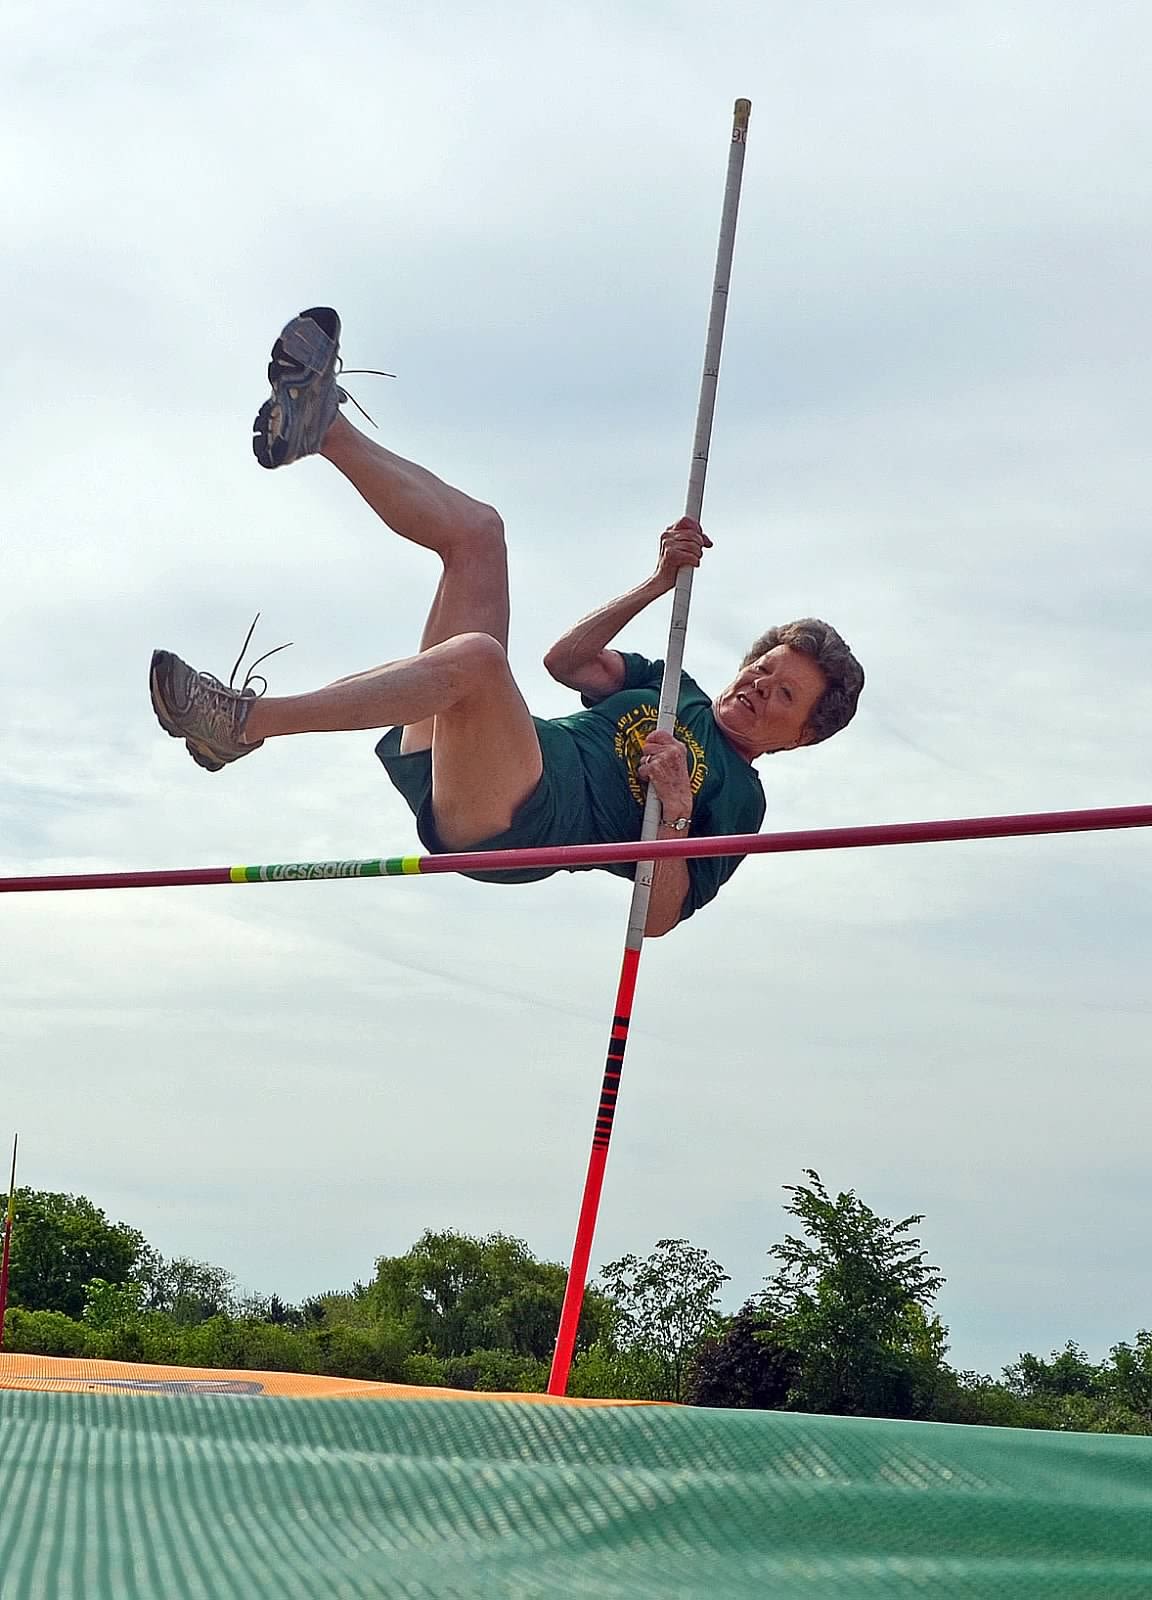 Pole-vaulting granny: It's 'never too late